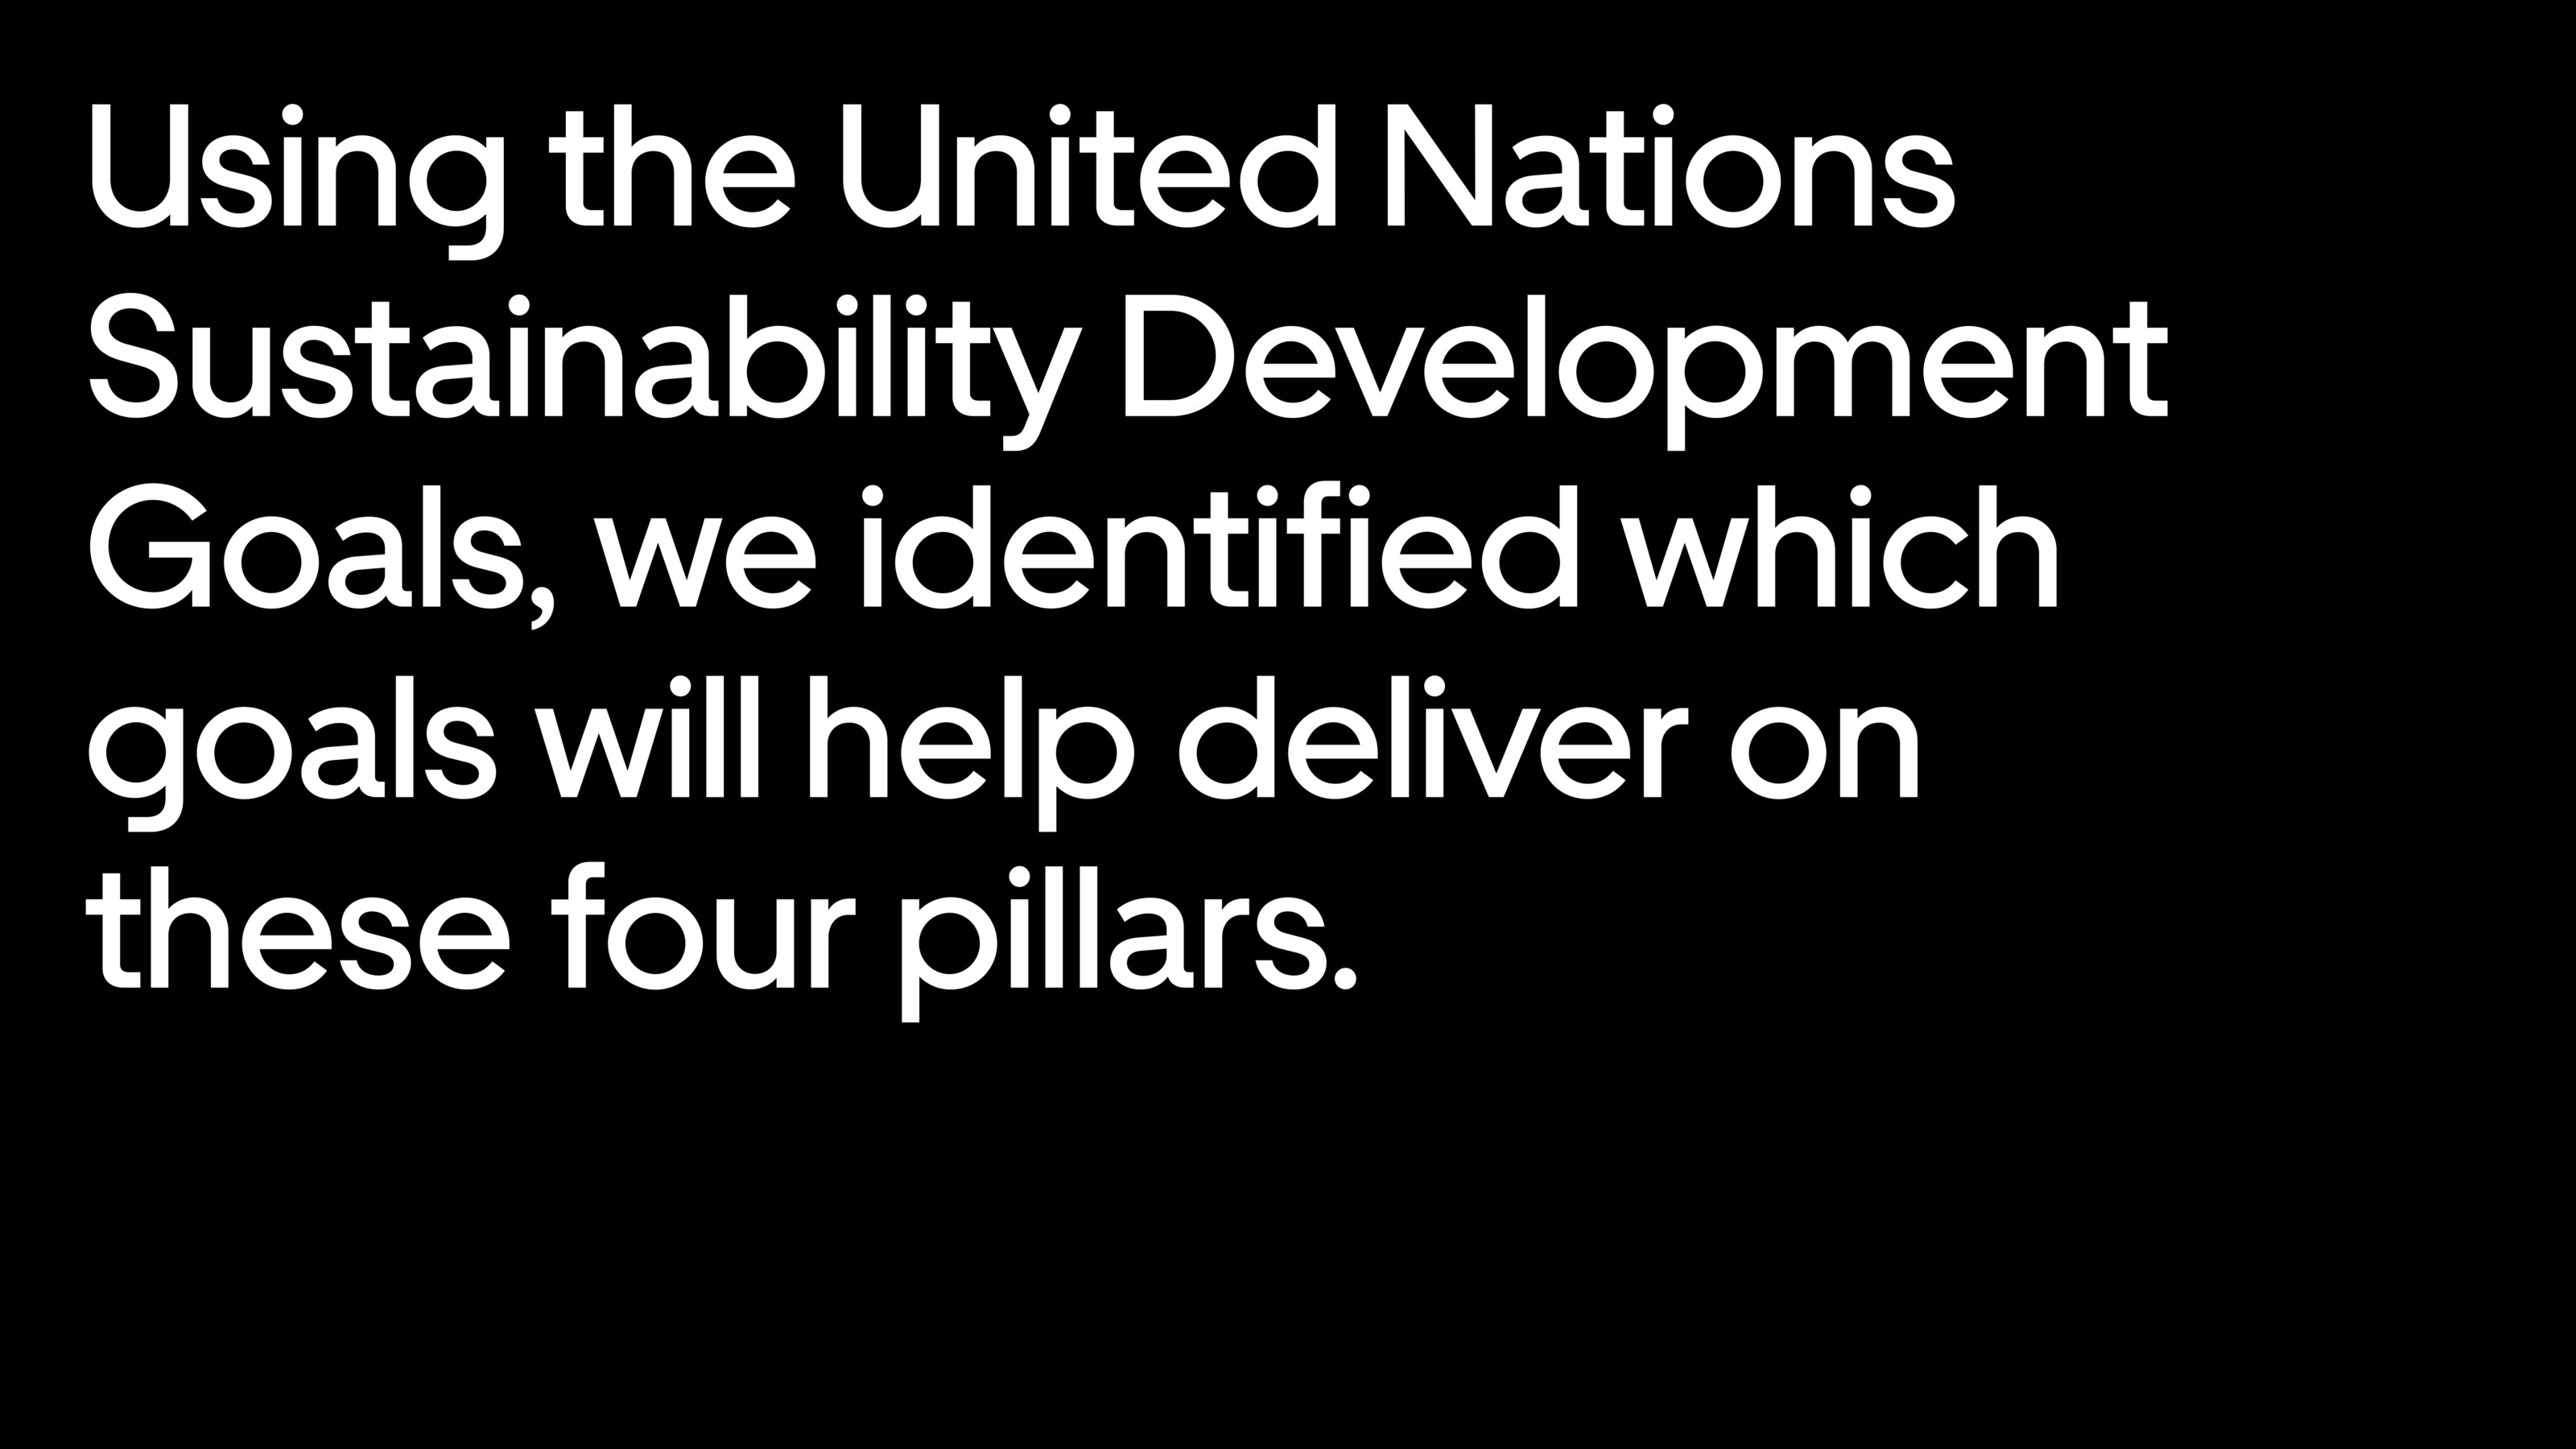 Using the United Nations Sustainability Development Goals, we identified which goals will help deliver on these four pillars.